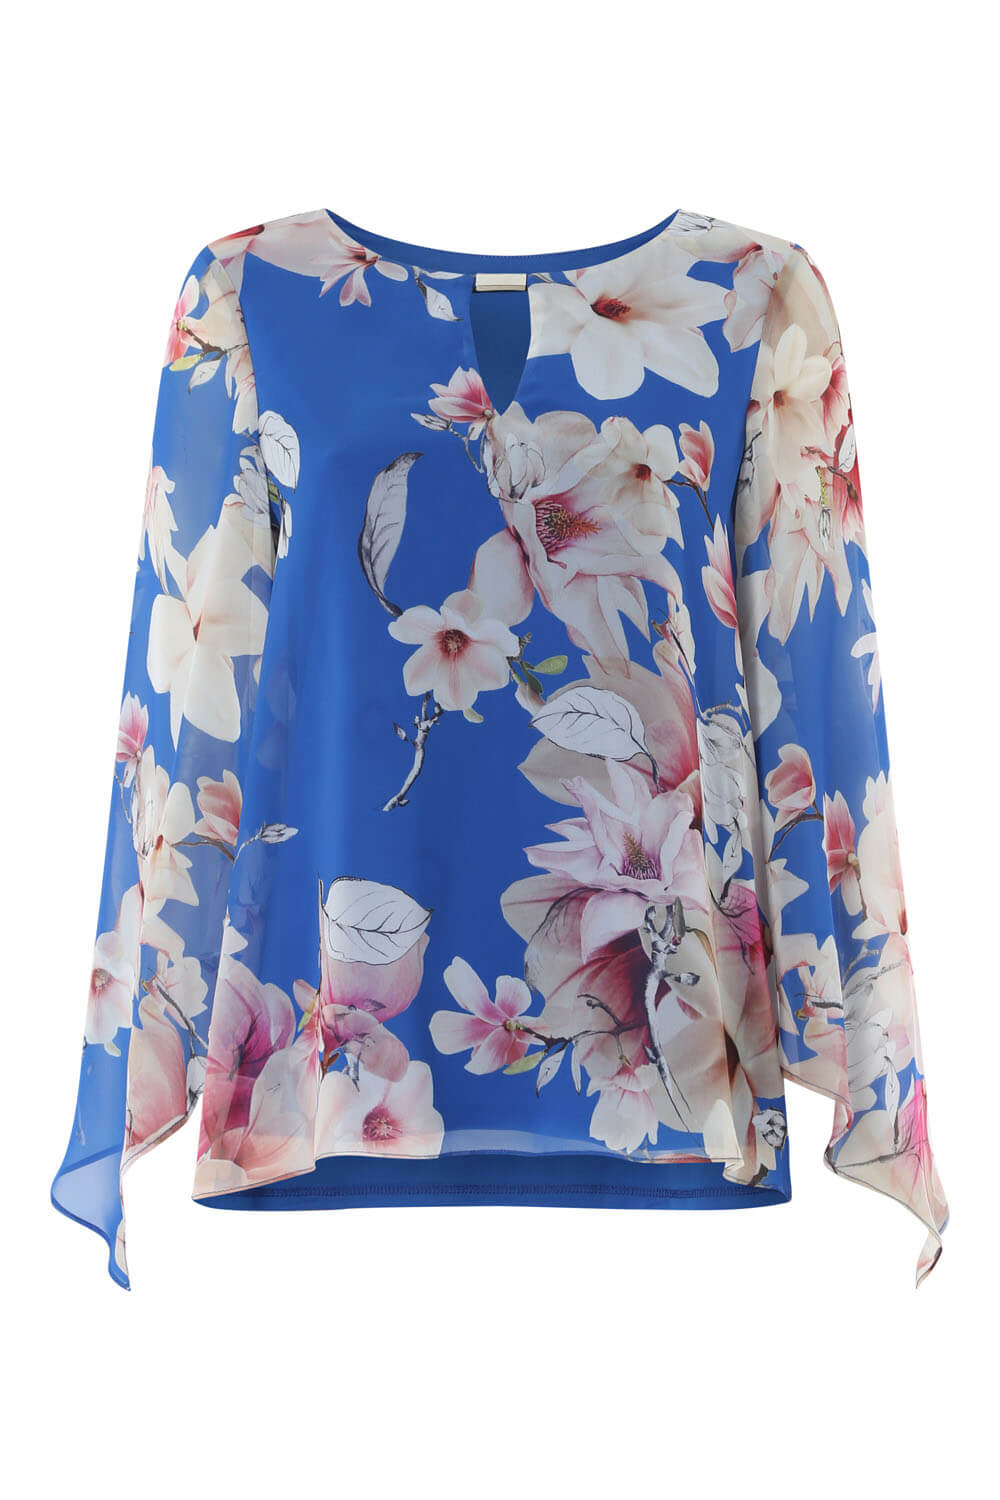 Royal Blue Floral Chiffon Overlay Top, Image 4 of 8